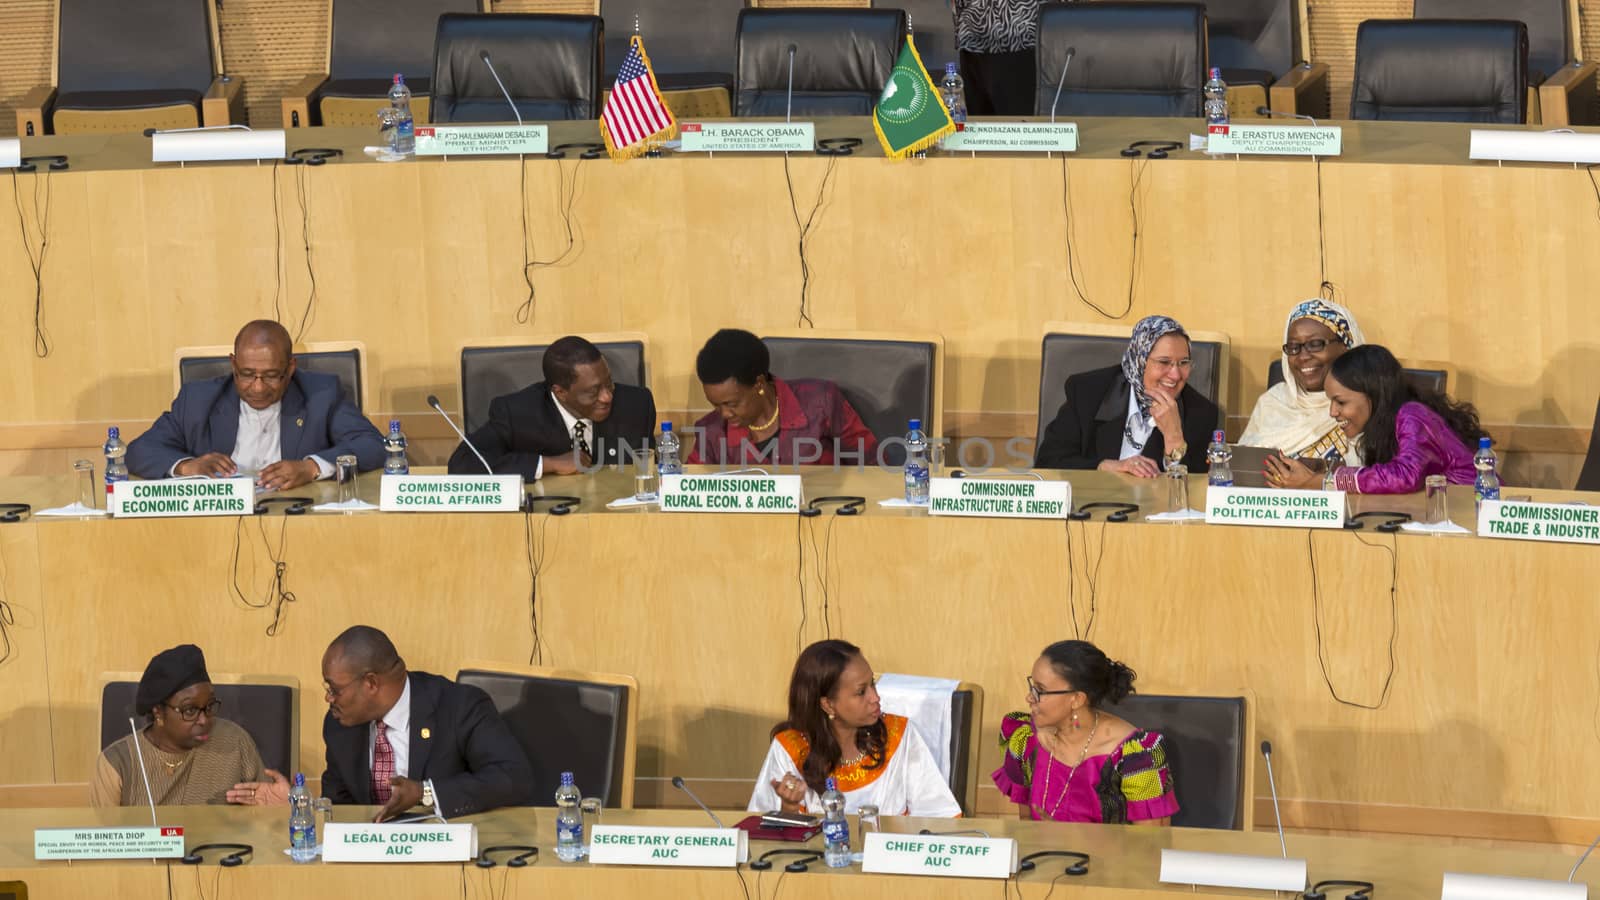 Addis Ababa - July 28: Commissioners and high level delegates of the African Union Commission await the arrival of President Obama on July 28, 2015, at the AU Conference Centre in Addis Ababa, Ethiopia.